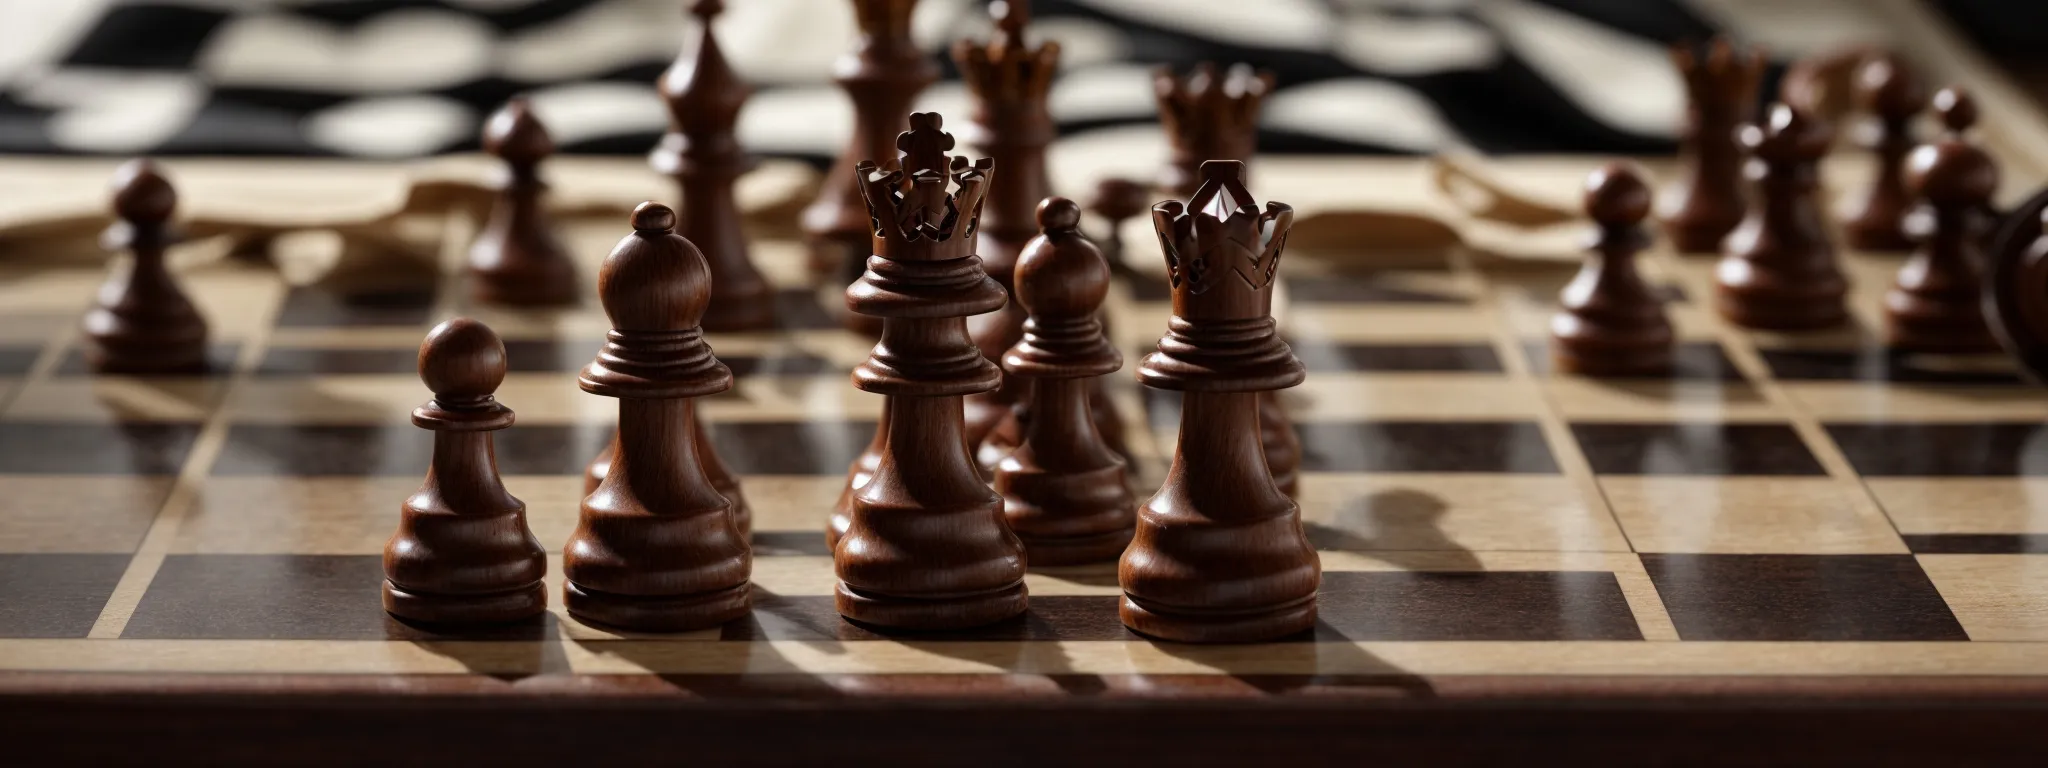 a chessboard with a blend of traditional and digital elements, illustrating strategic marketing moves.